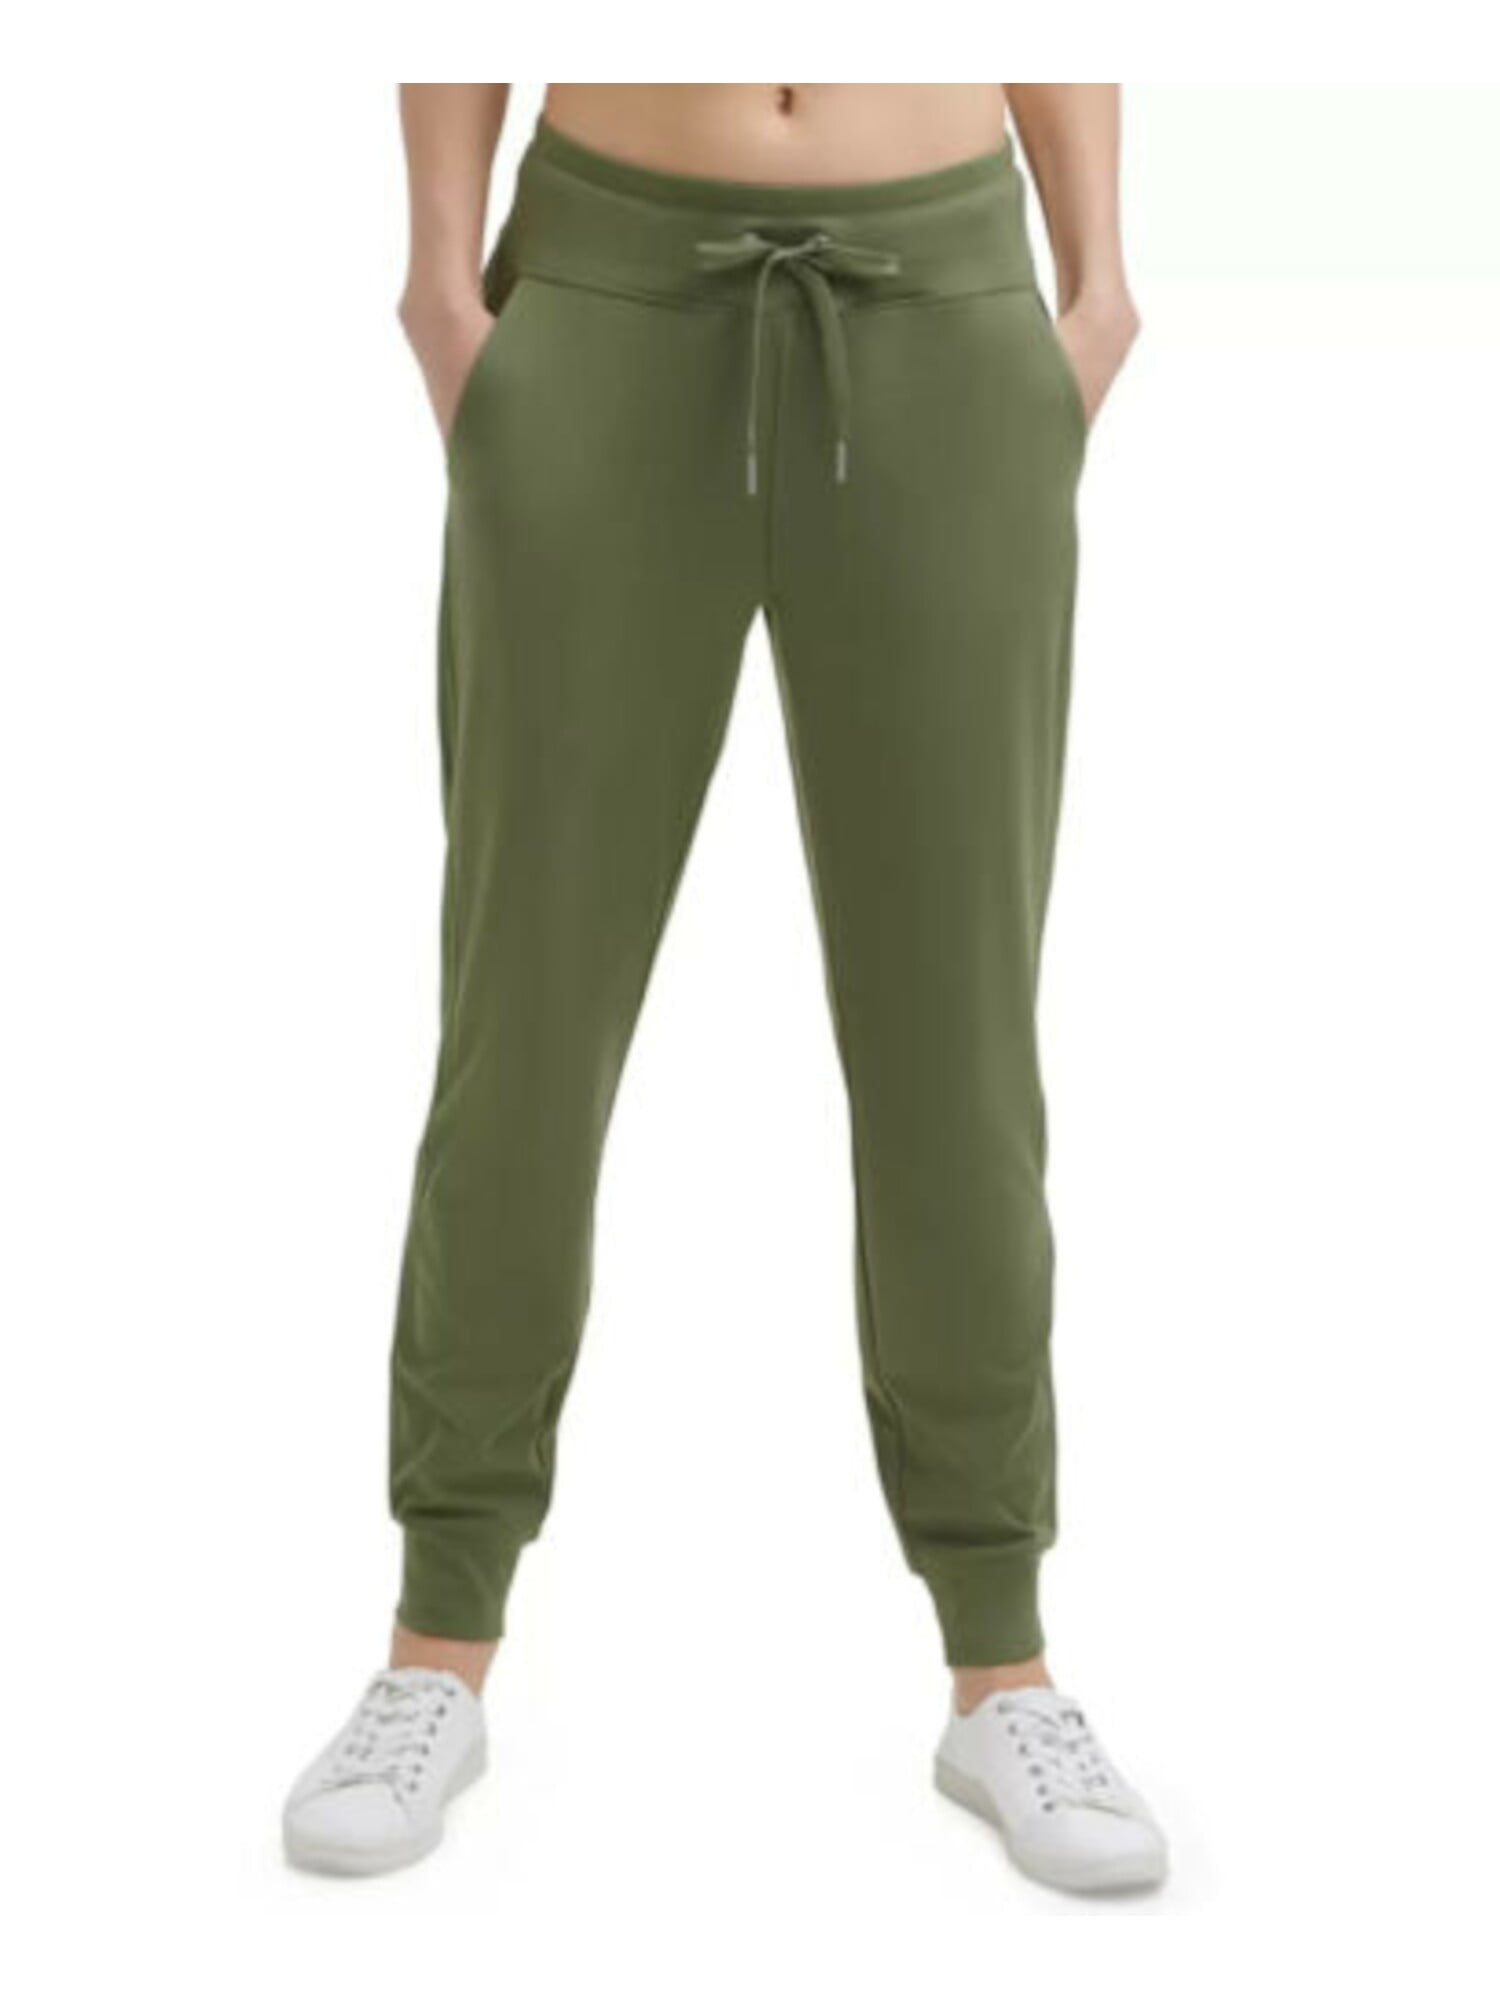 CALVIN KLEIN PERFORMANCE Womens Green Stretch Pocketed Drawstring Joggers  Active Wear Cuffed Pants M